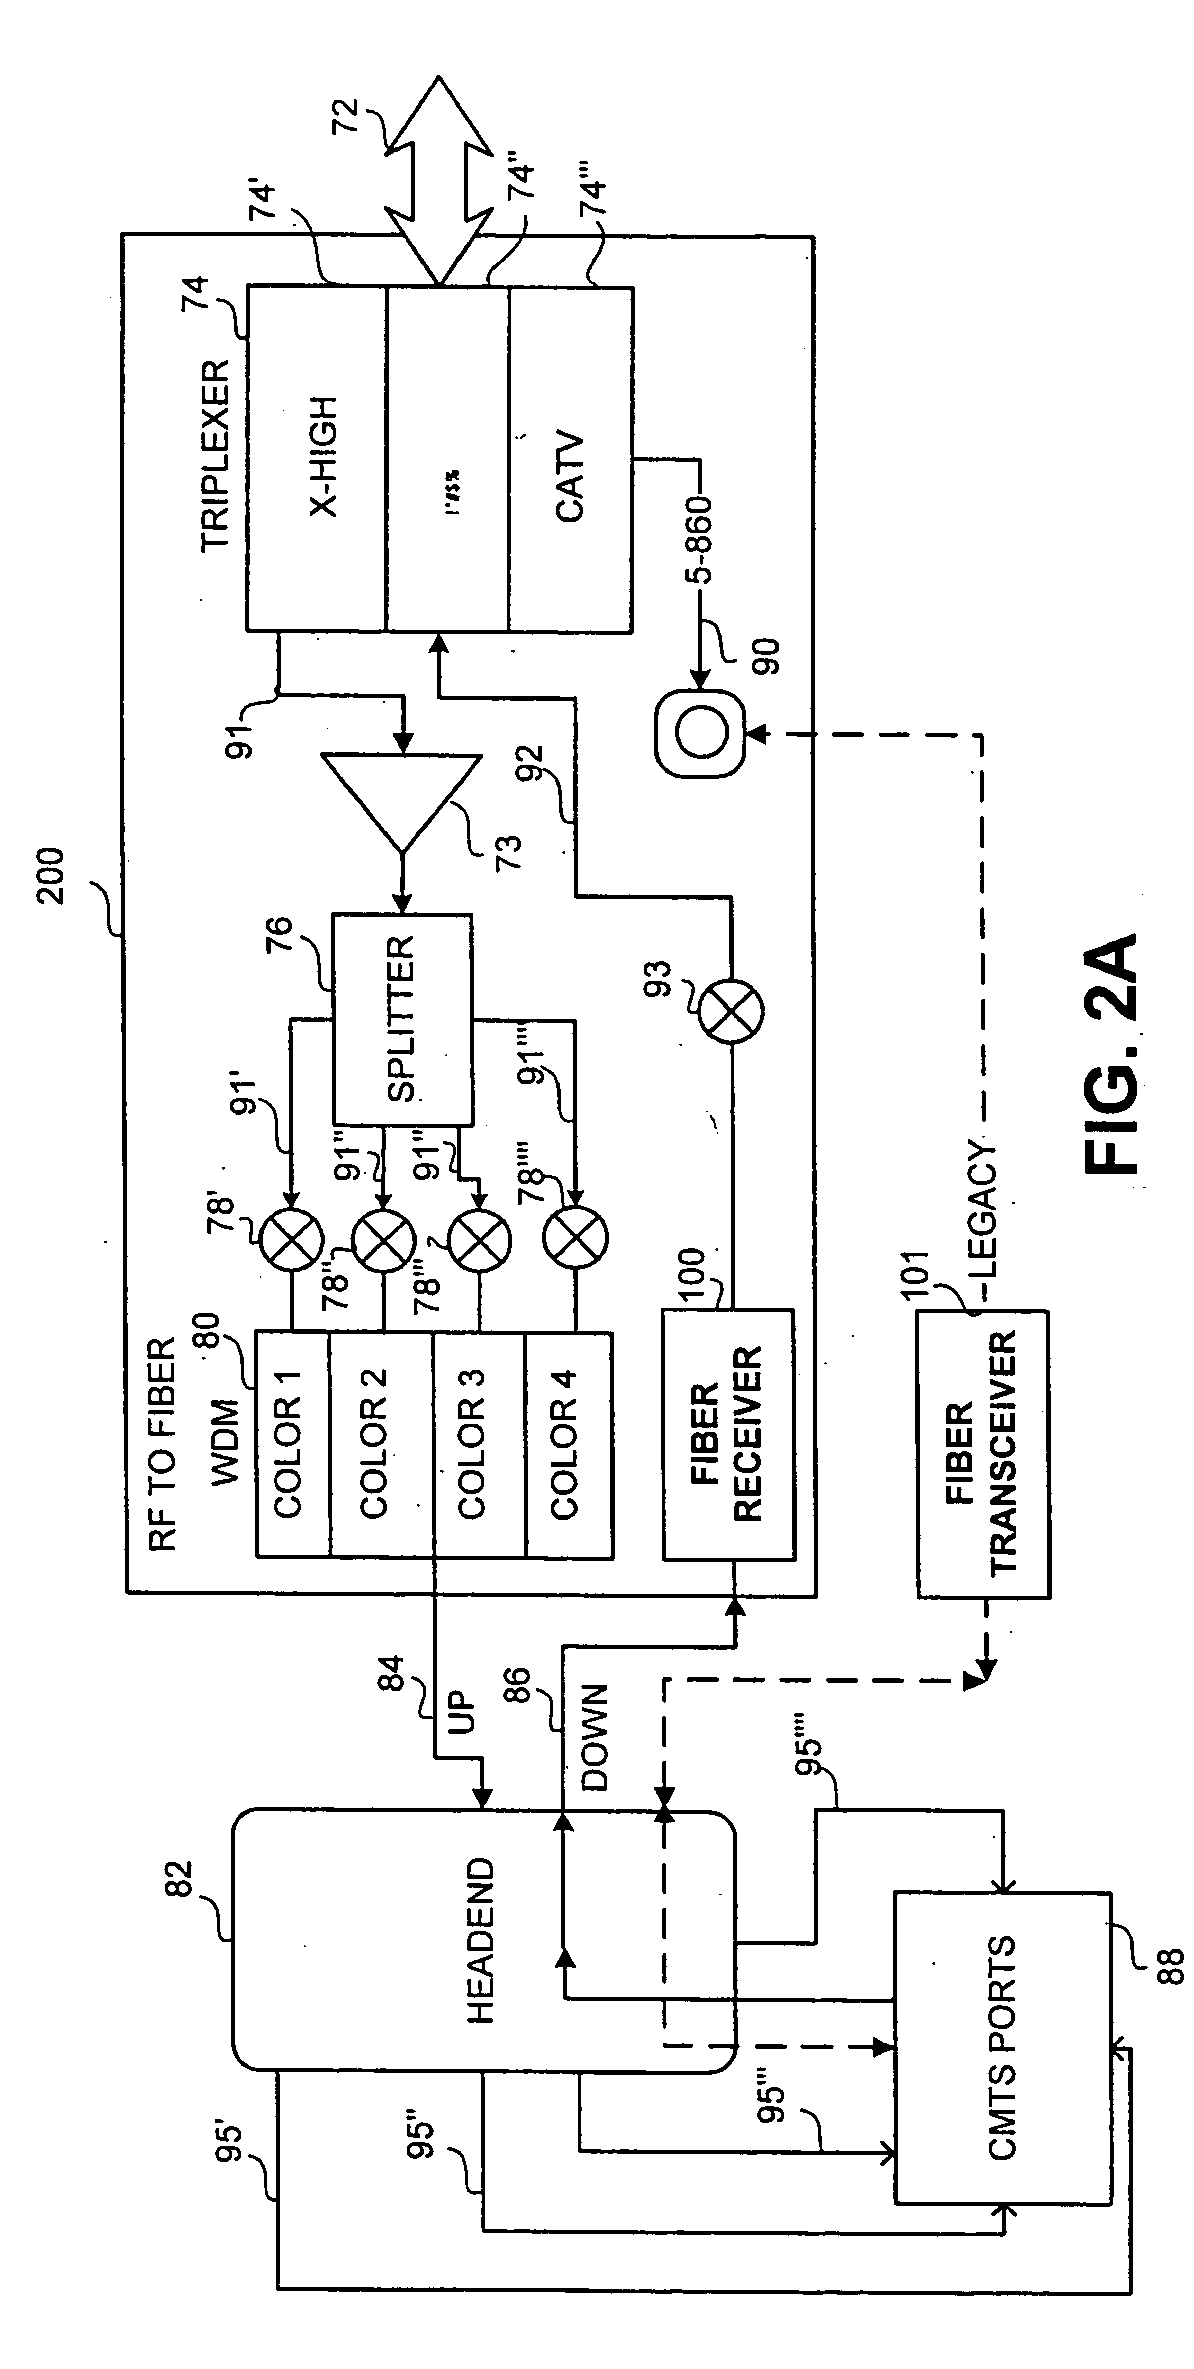 Wideband node in a cable TV network